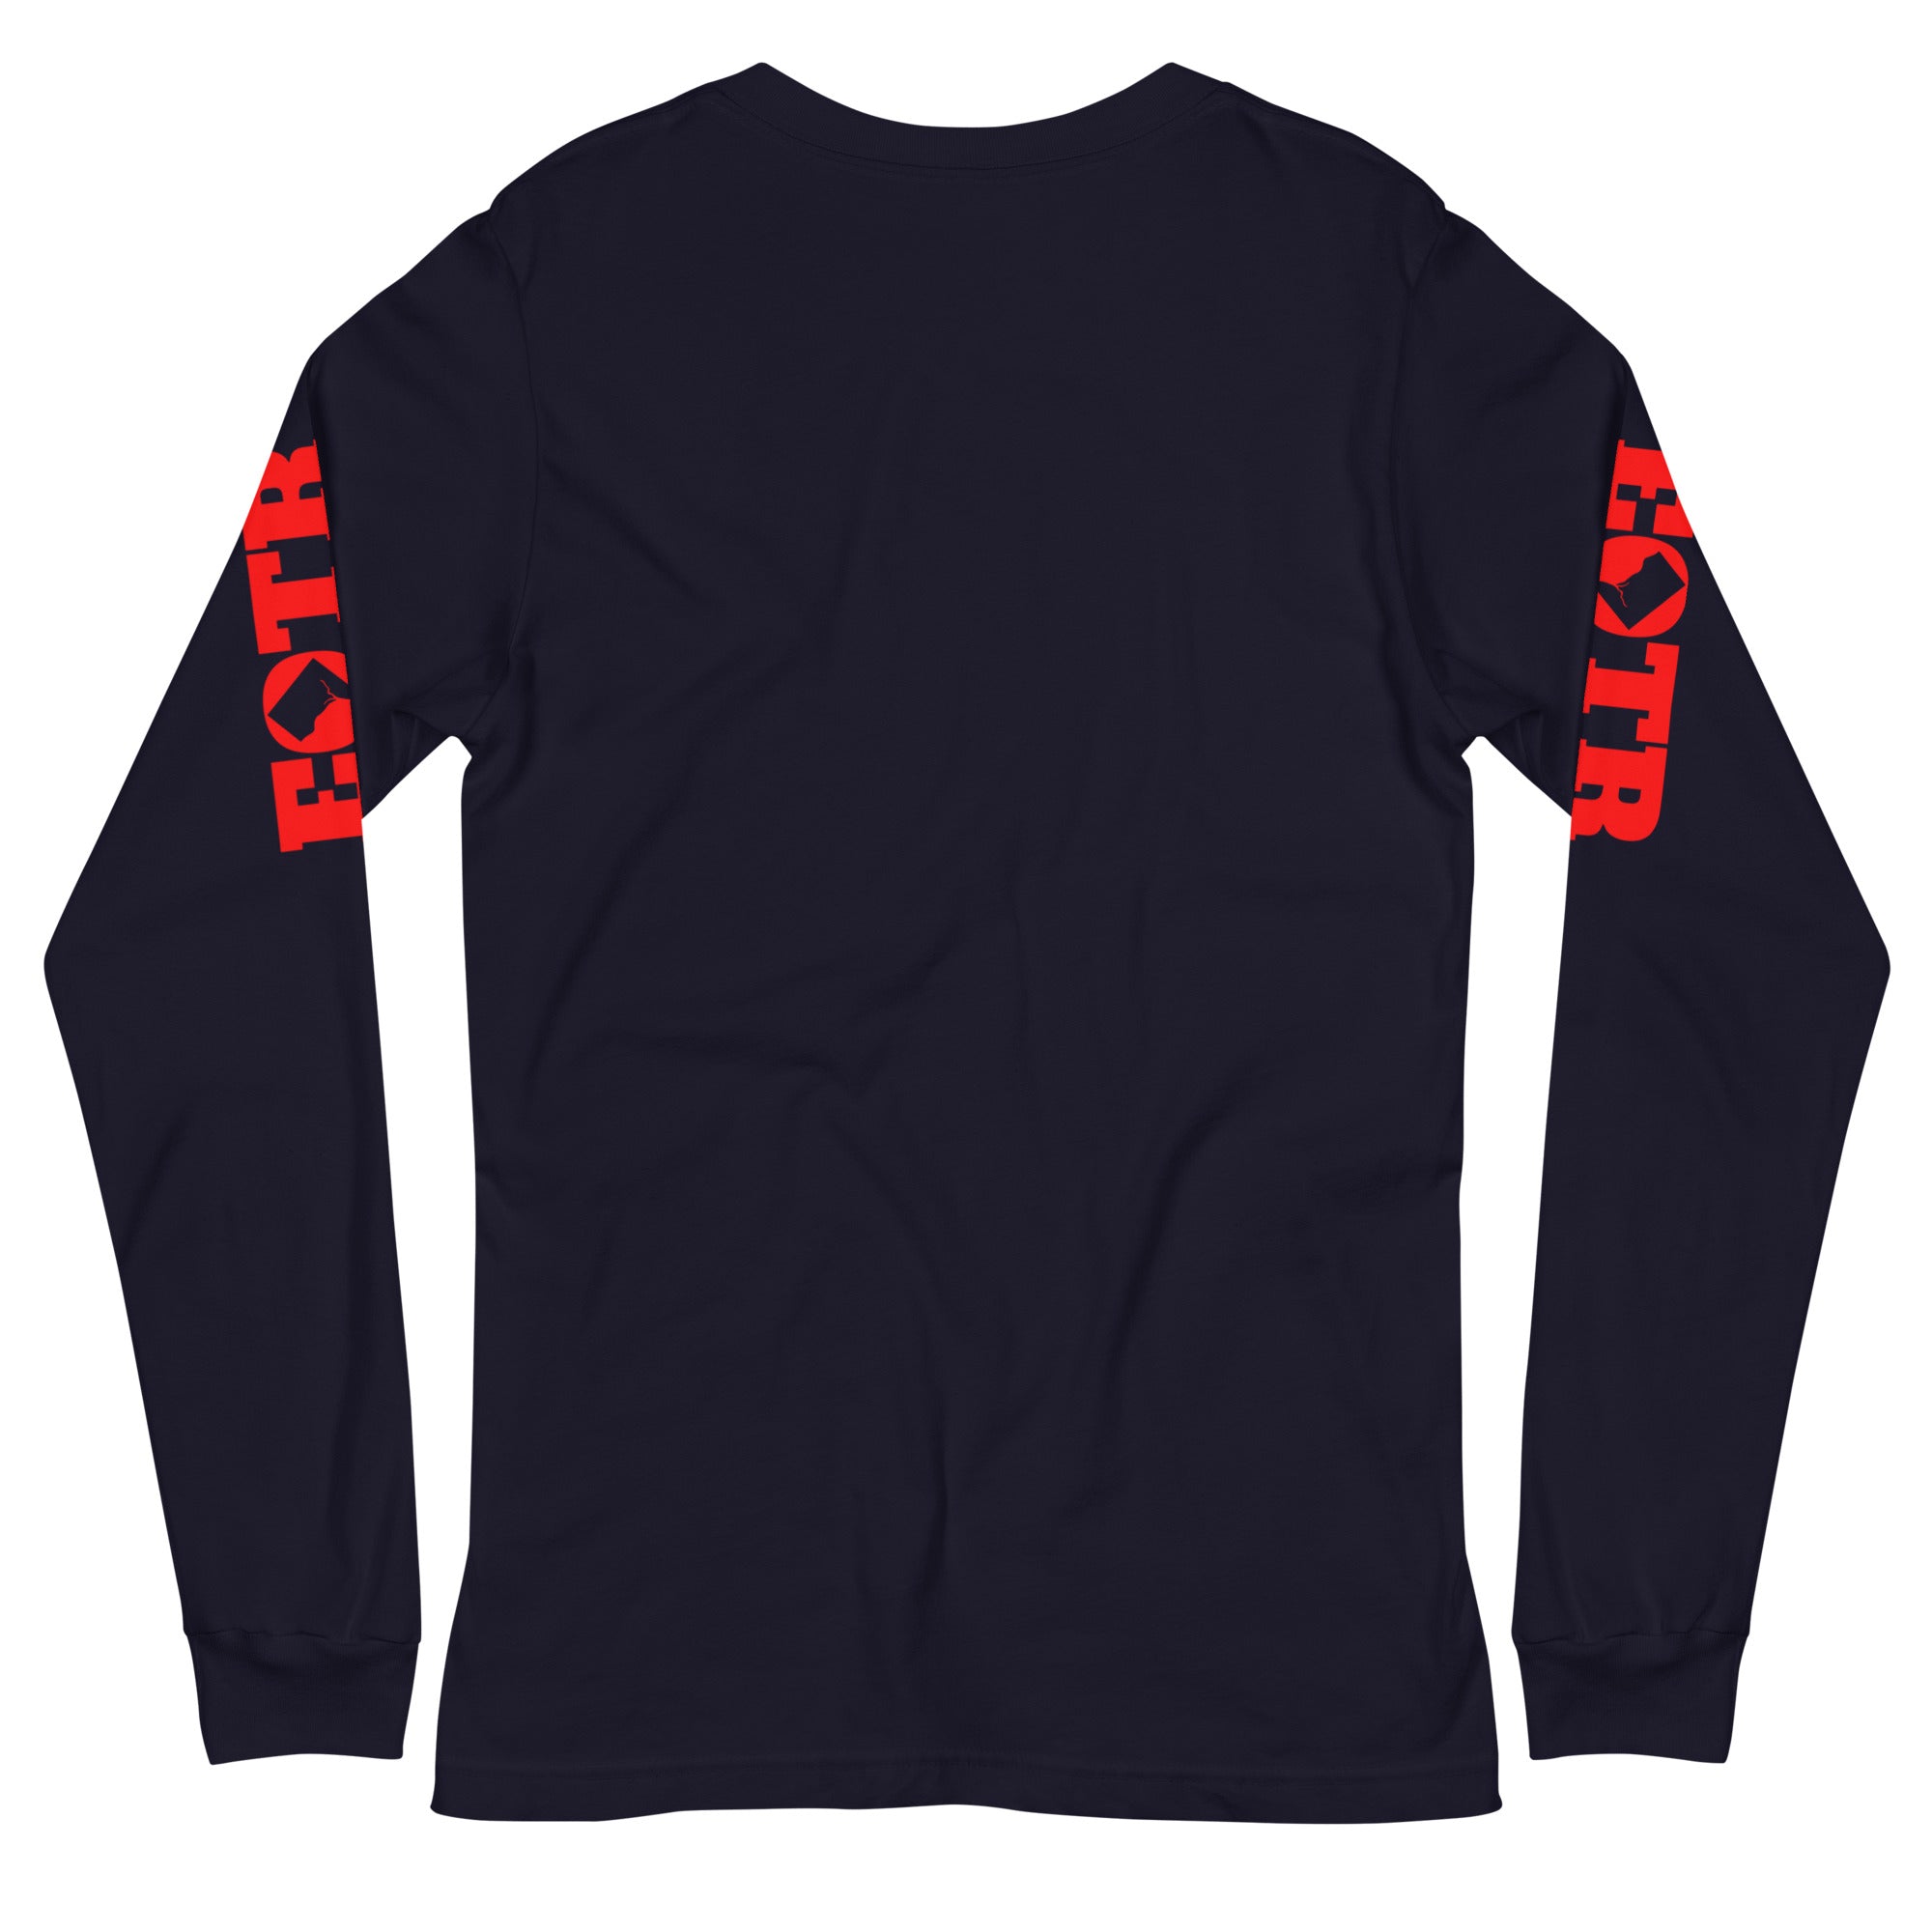 'Southeast: East of the River' Long Sleeve, Navy T-Shirt (Unisex)